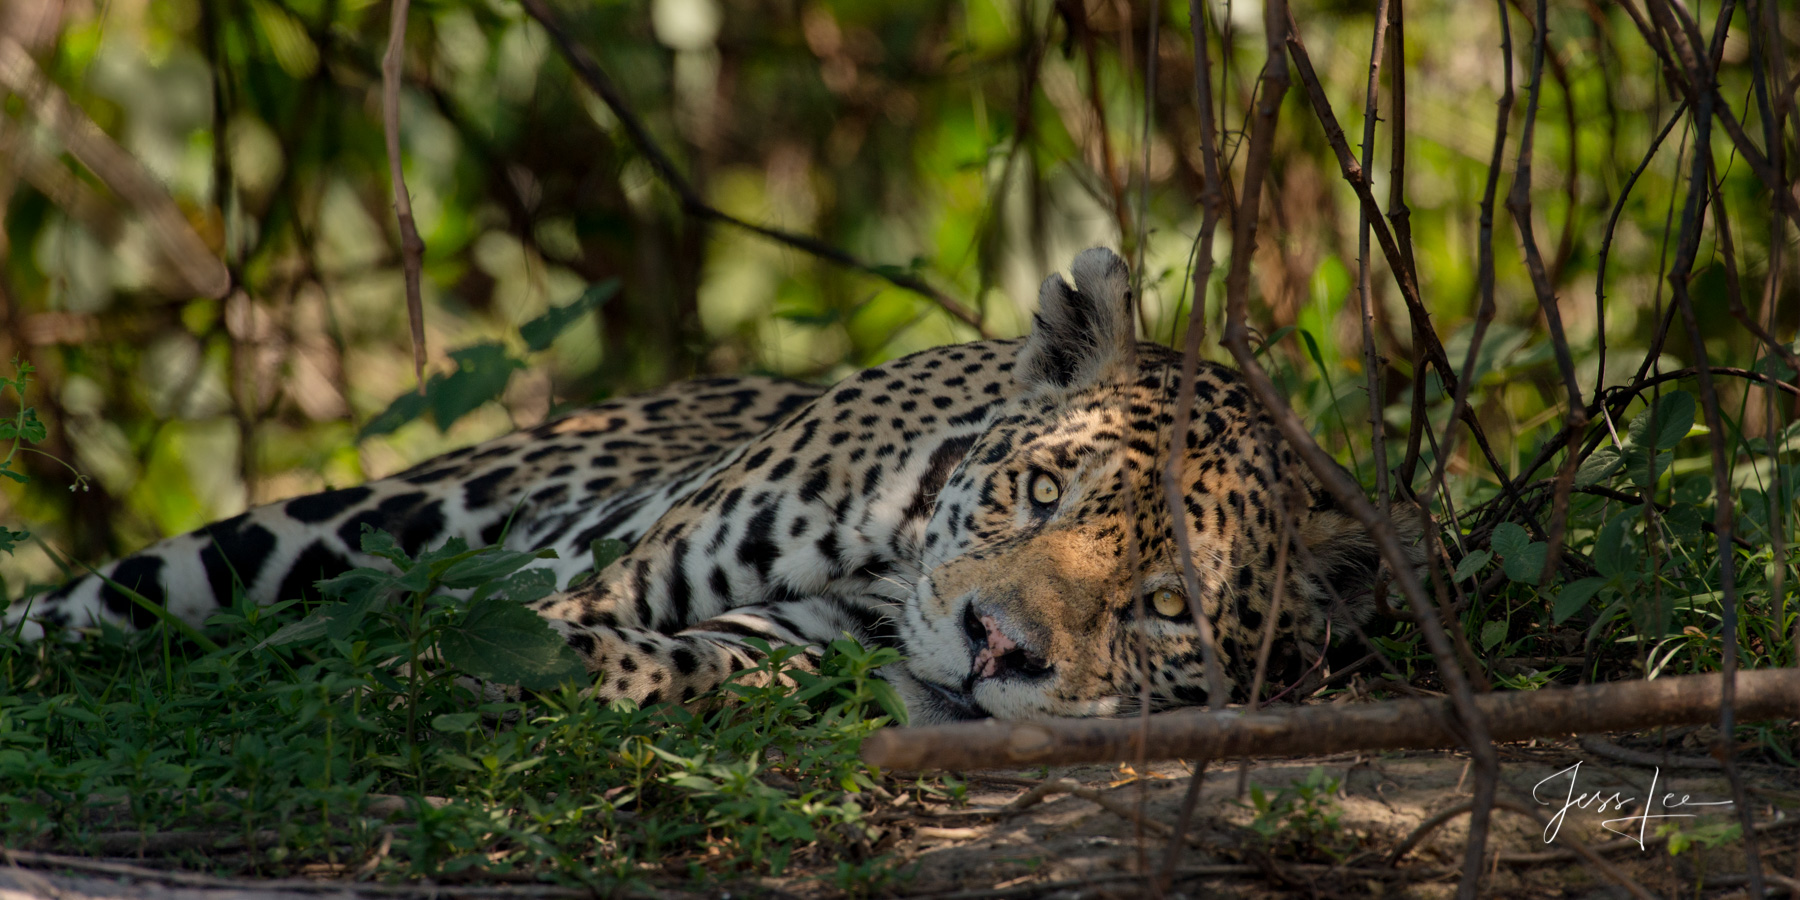 Fine art Jaguar napping print limited edition of 300 luxury prints by Jess Lee. All photographs copyright © Jess Lee